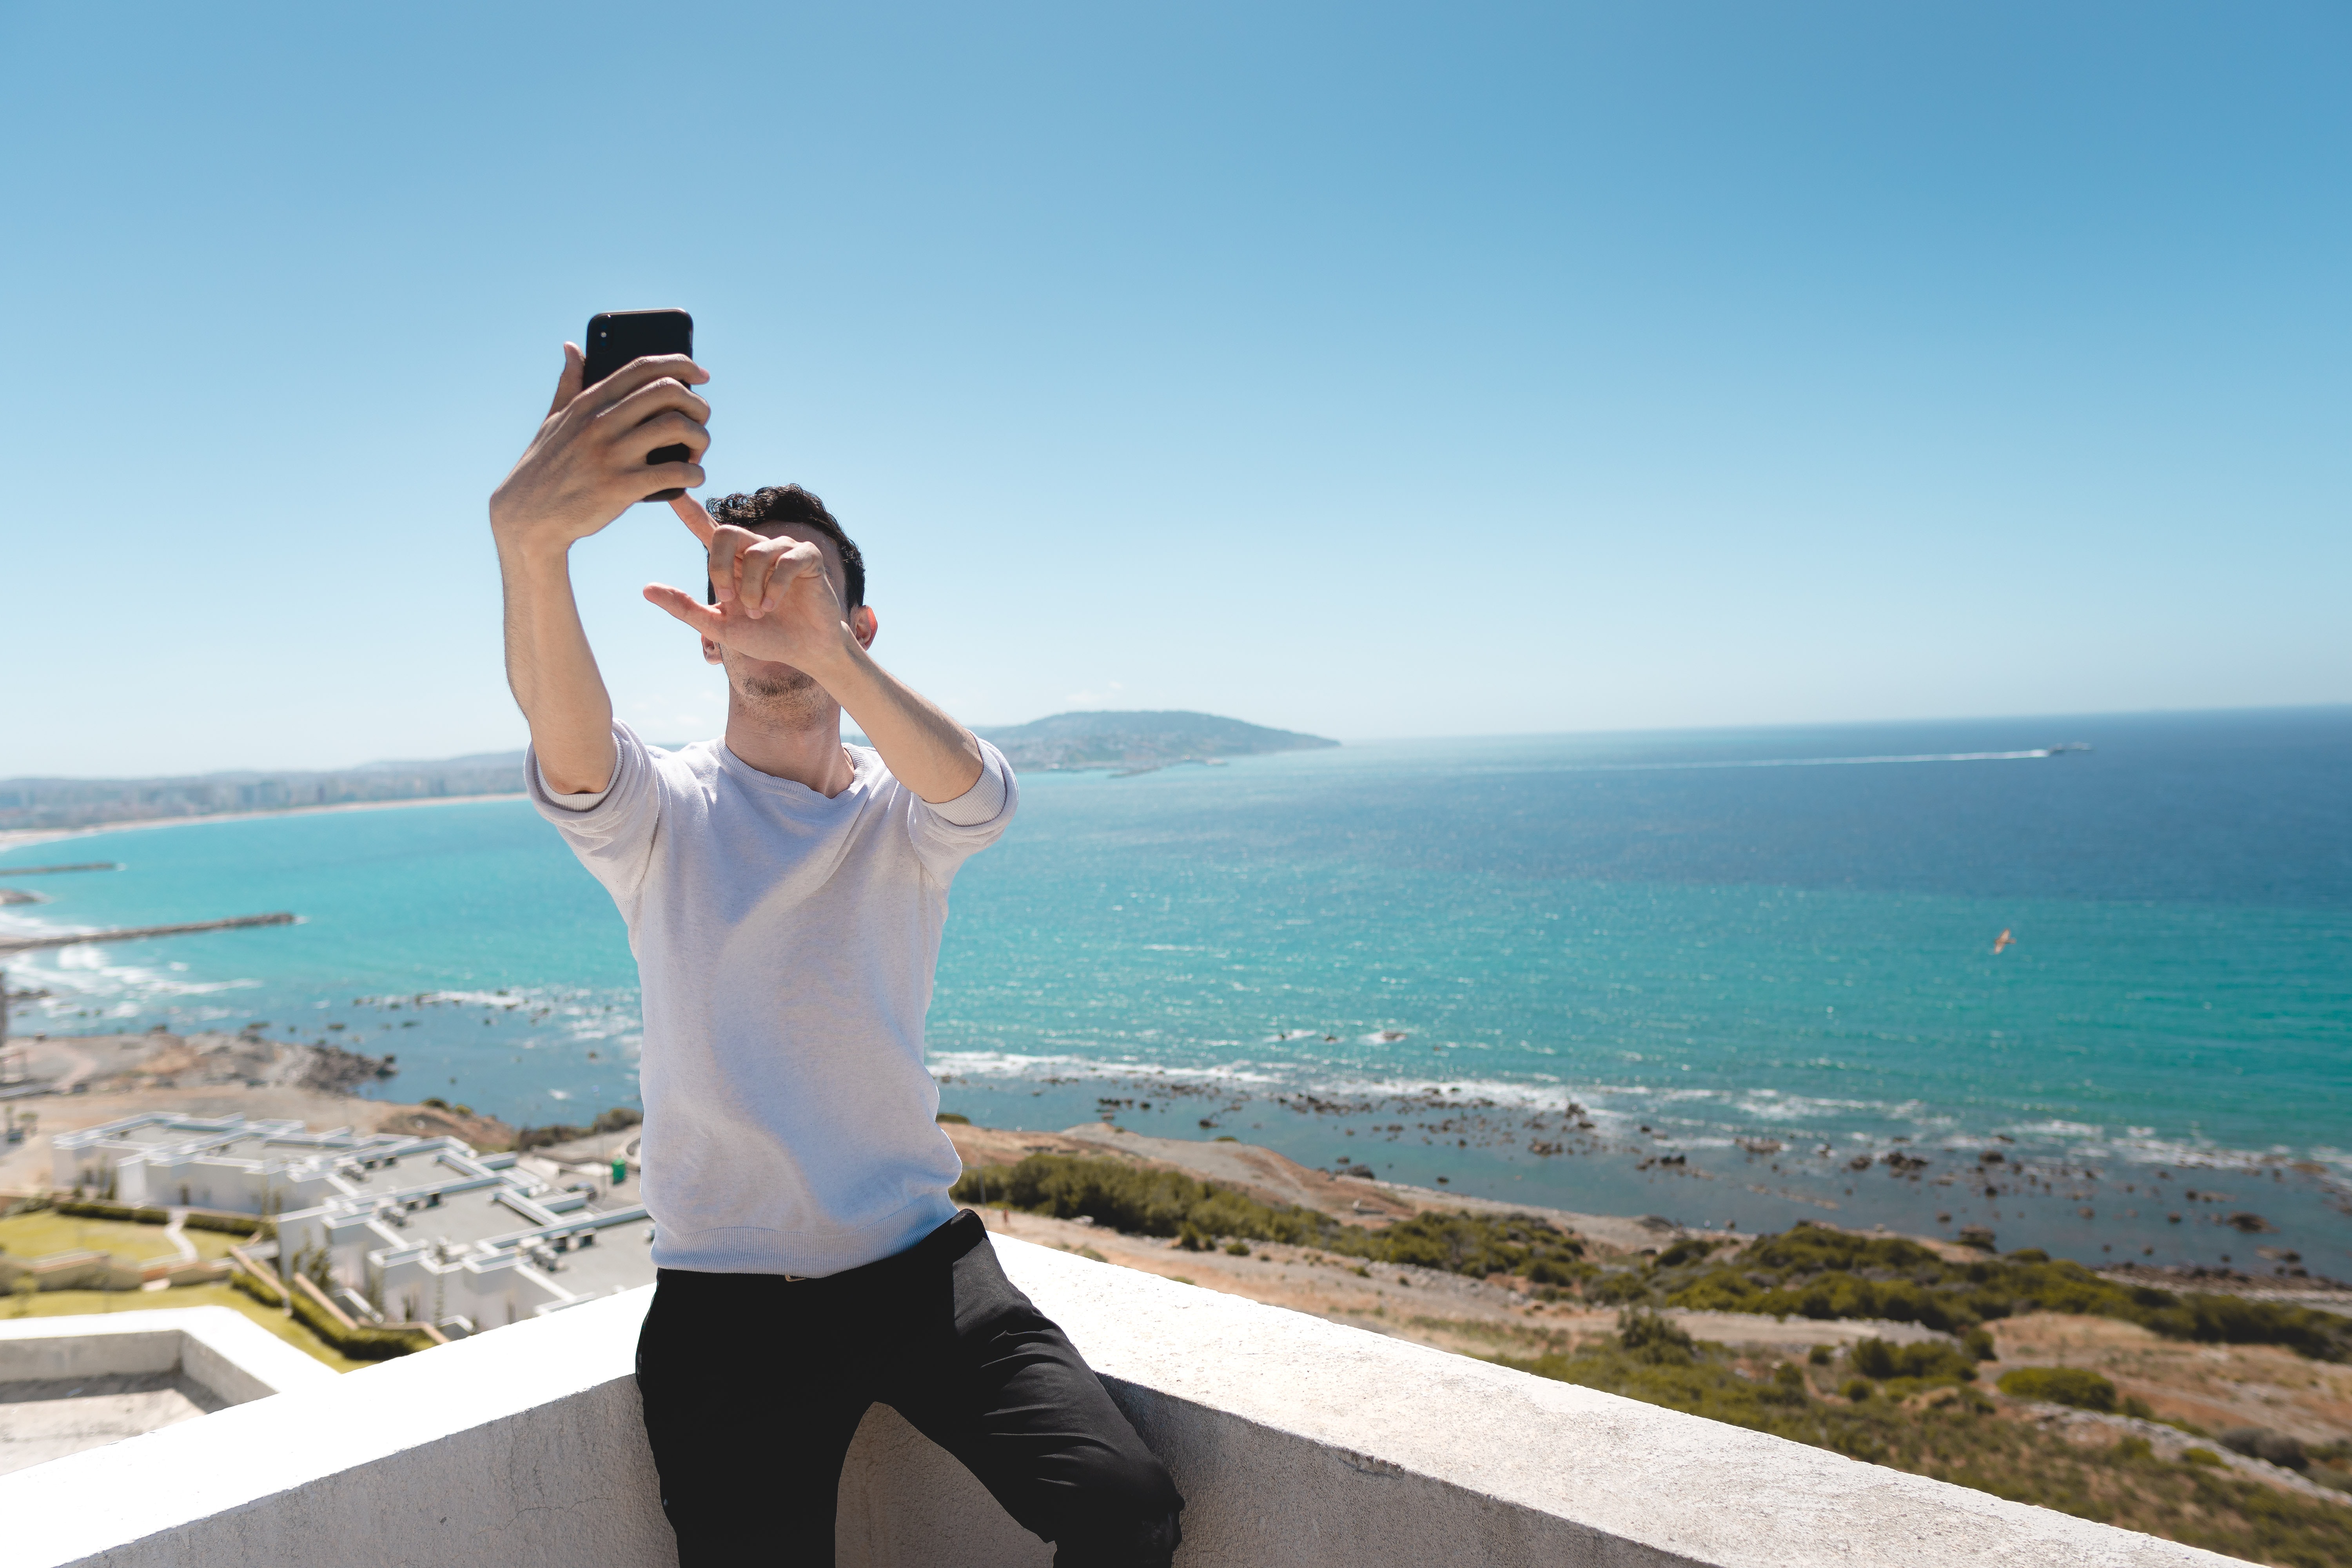 A man takes a selfie on the roof of a white building with a sunny beach in the background